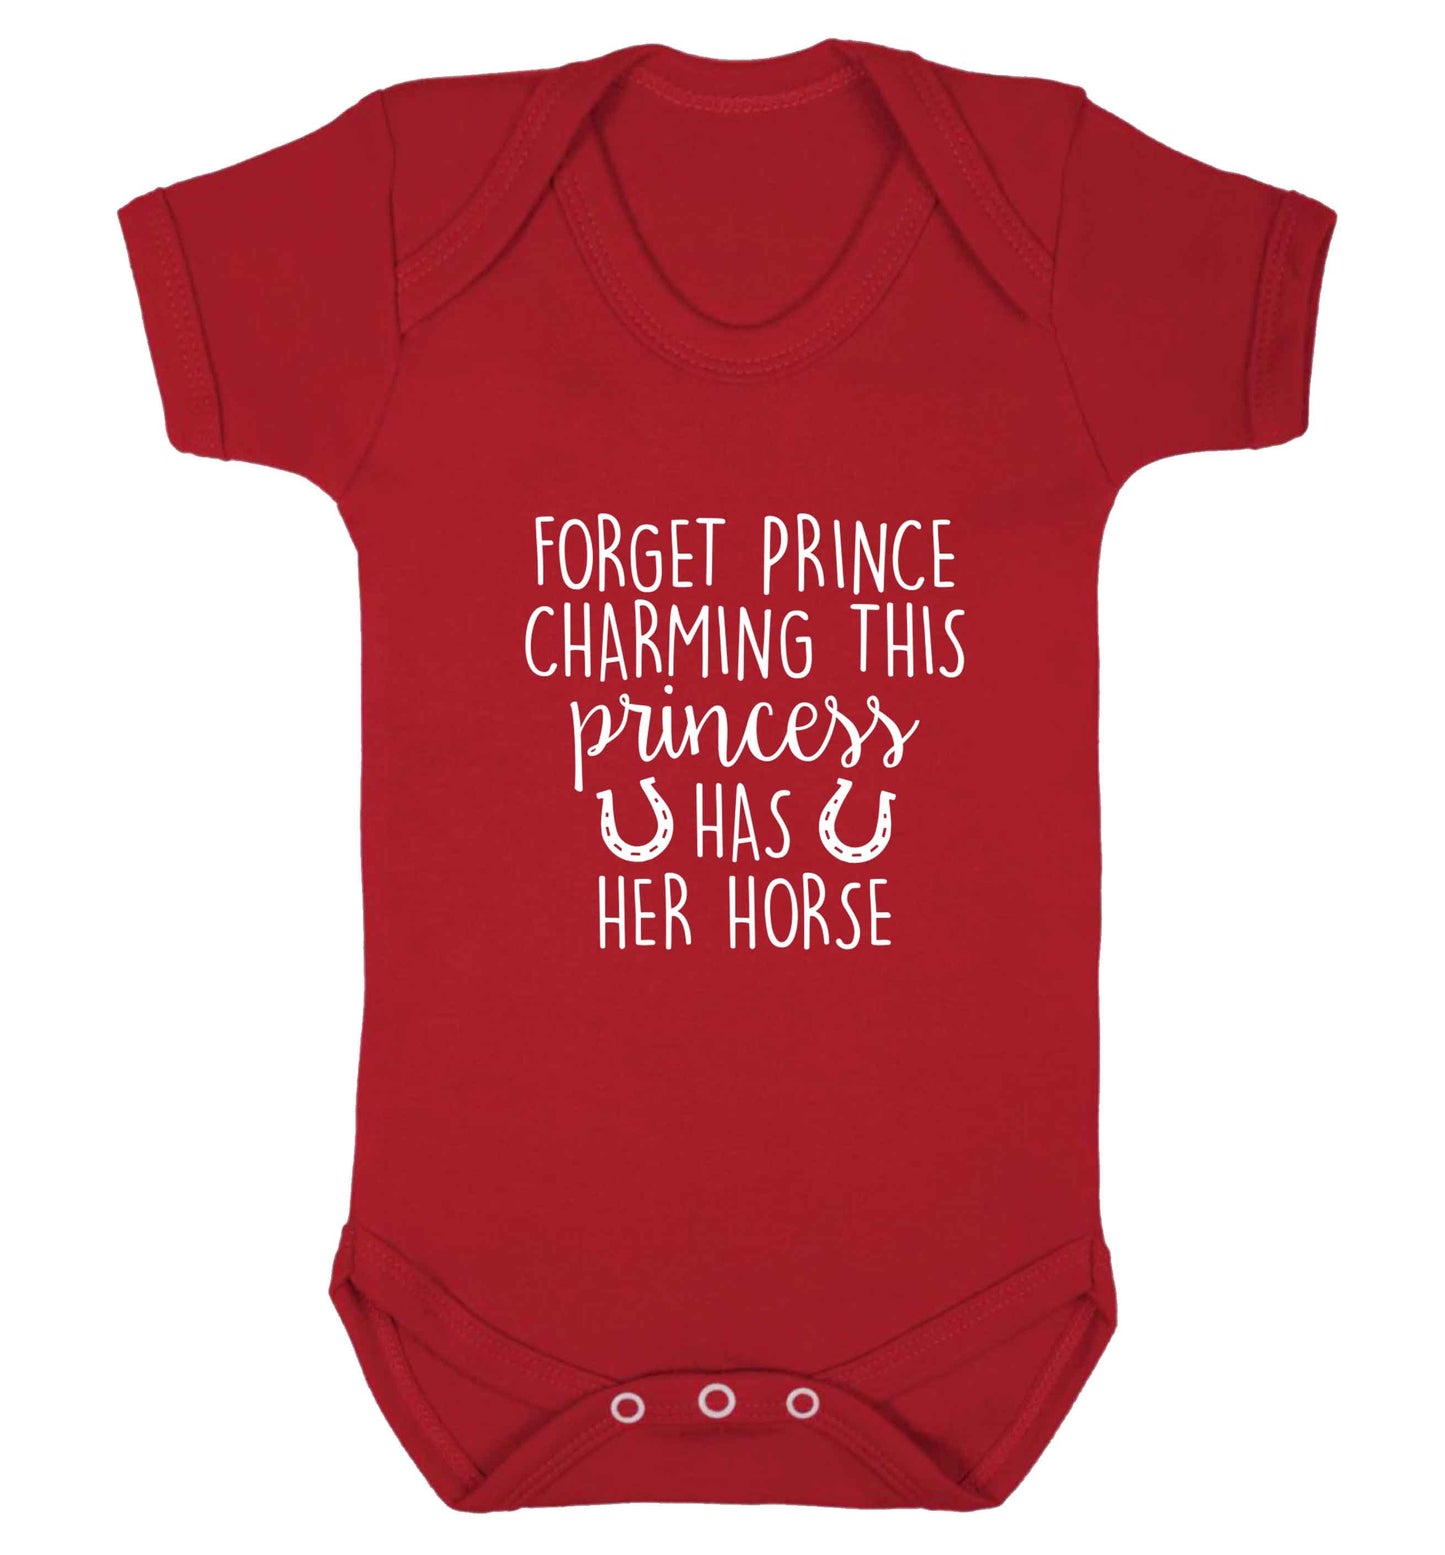 Forget prince charming this princess has her horse baby vest red 18-24 months